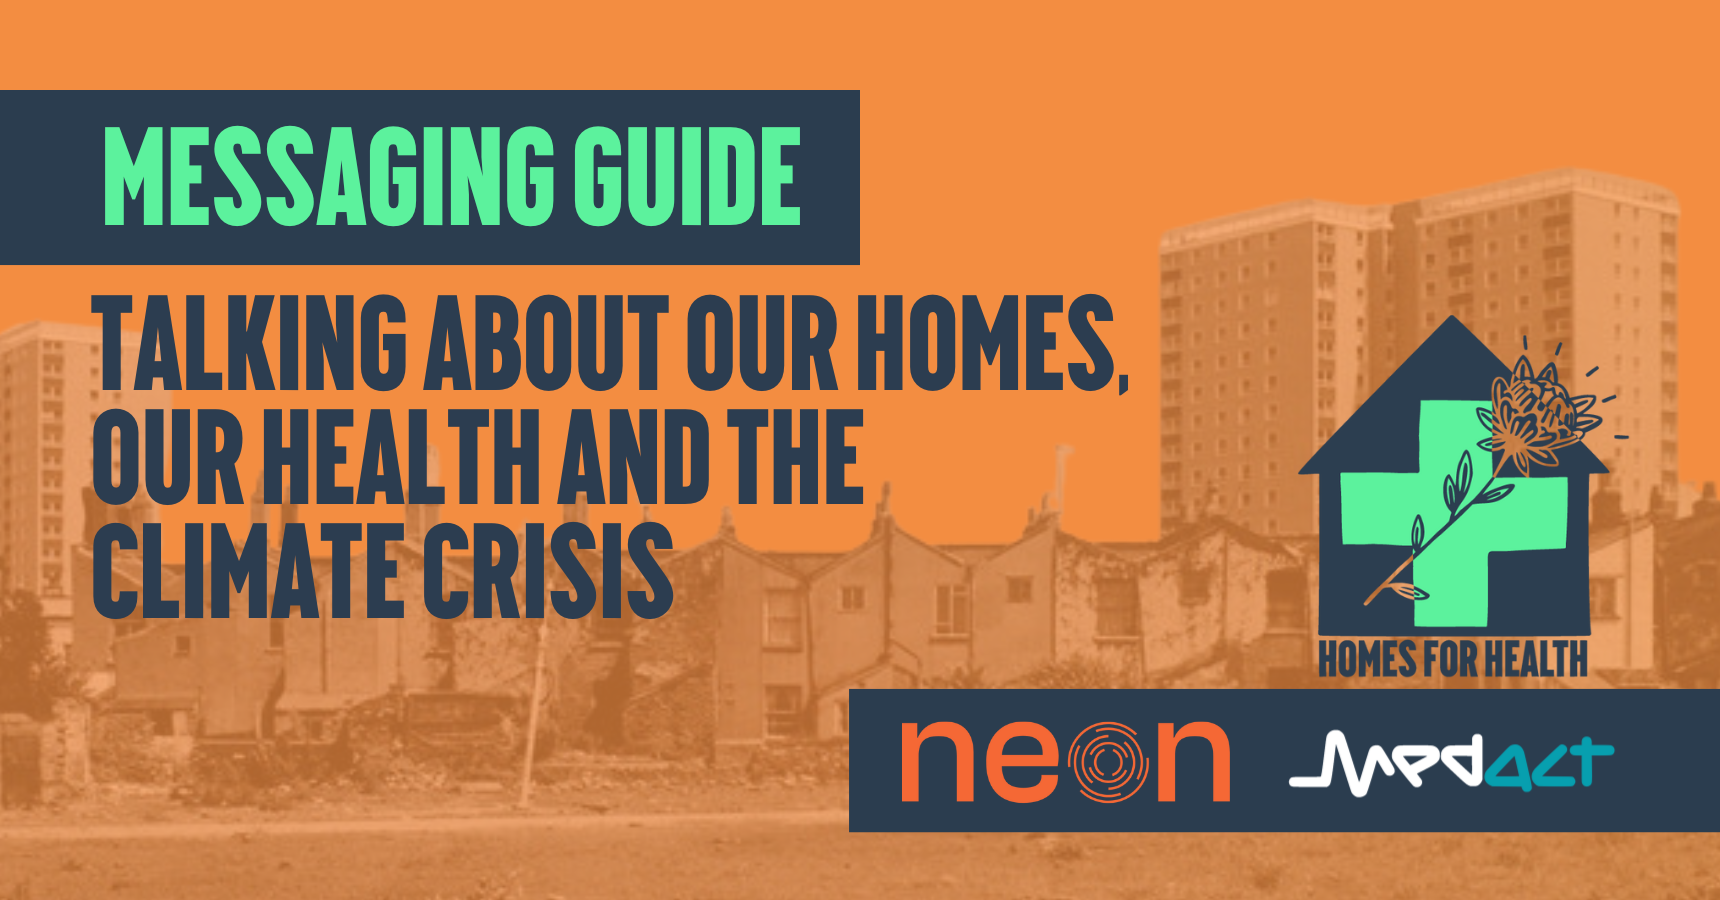 Messaging Guide: Housing + Fuel Poverty